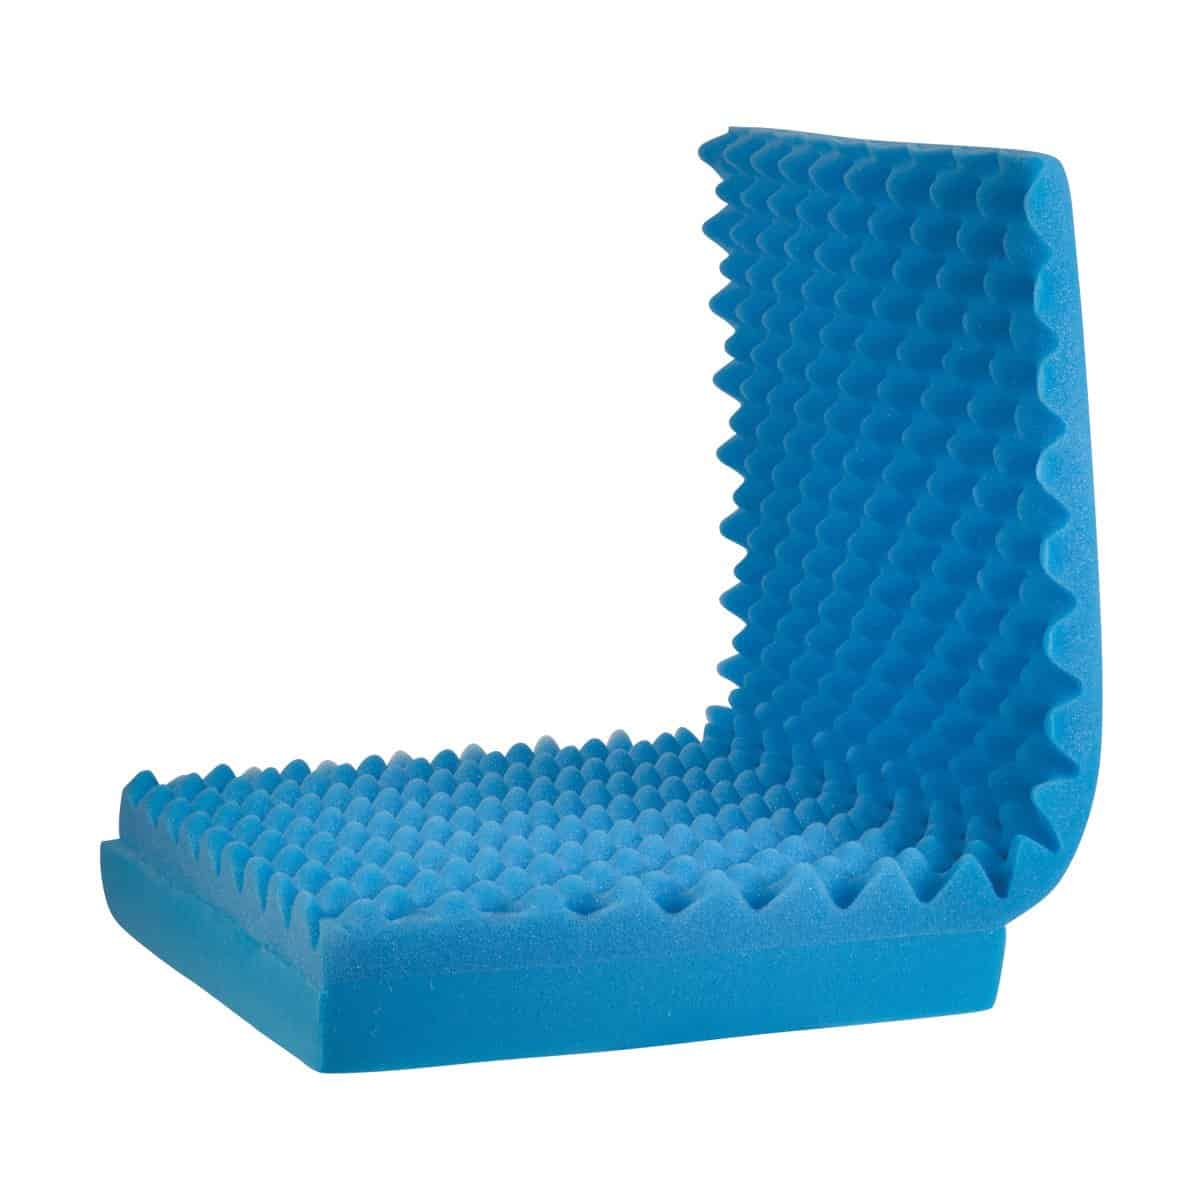 MABIS Convoluted Foam Chair Pad and Seat Only 552-8004-0000 - The